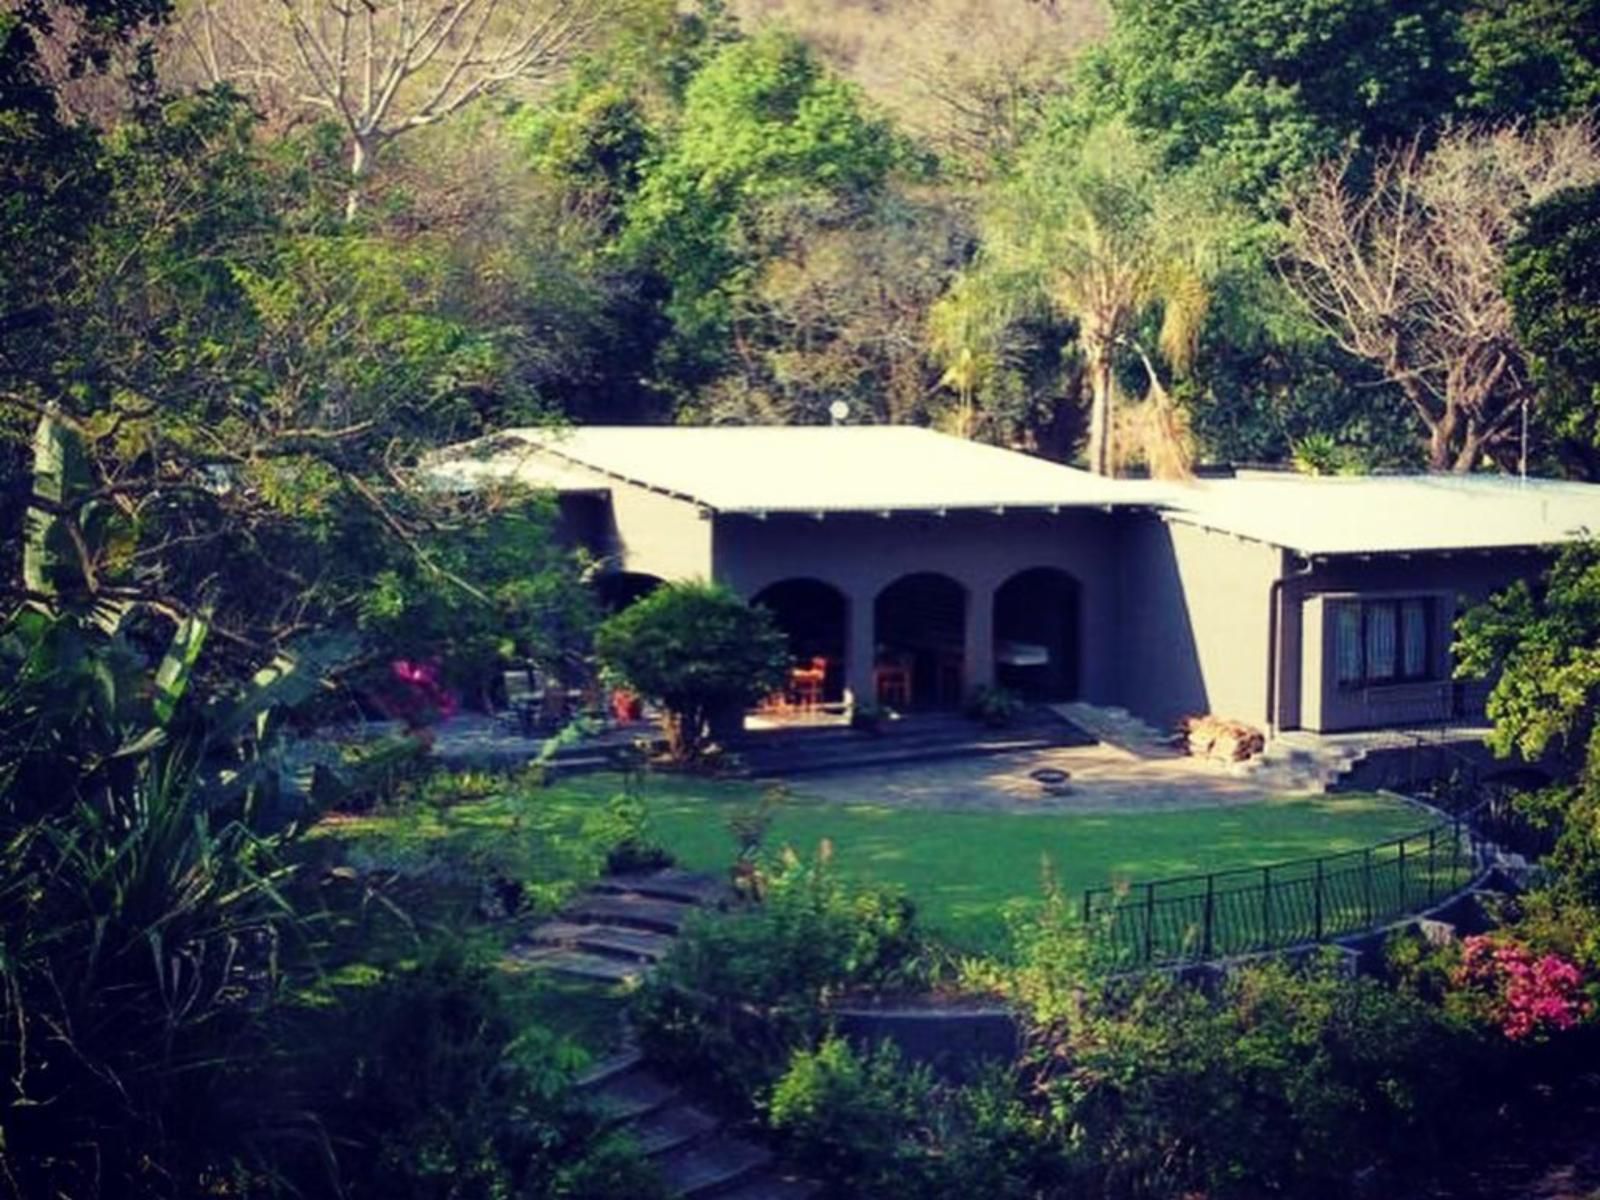 Linvale Country Lodge Hazyview Mpumalanga South Africa House, Building, Architecture, Garden, Nature, Plant